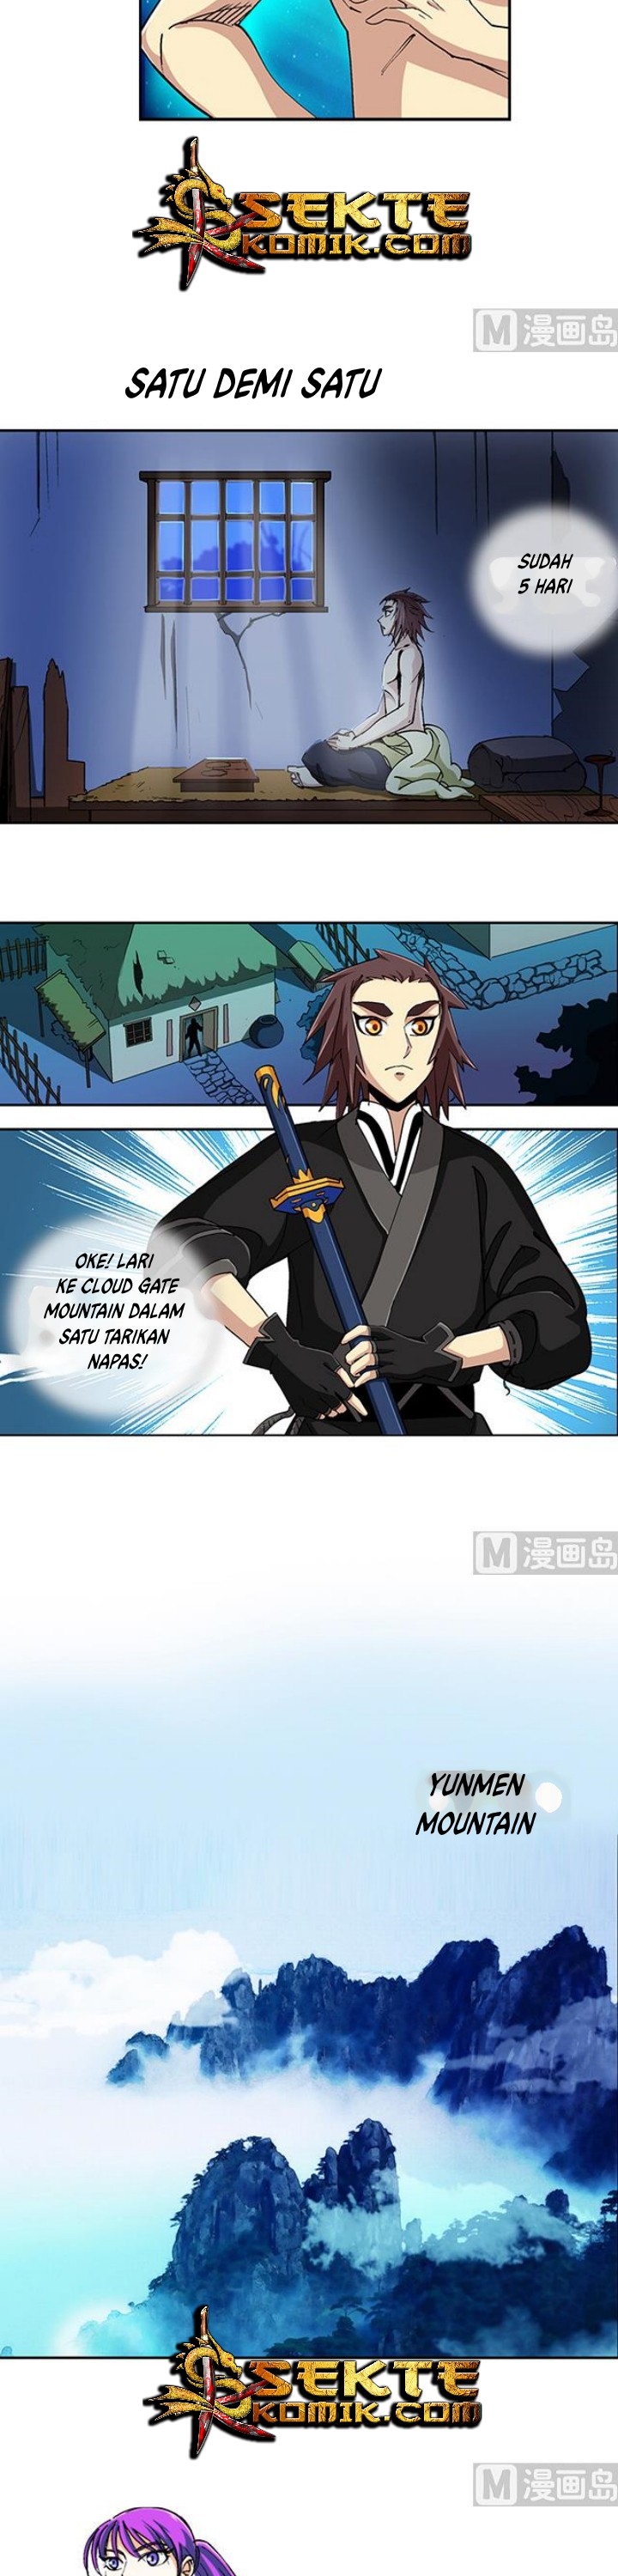 A Legend of The Wind Chapter 44